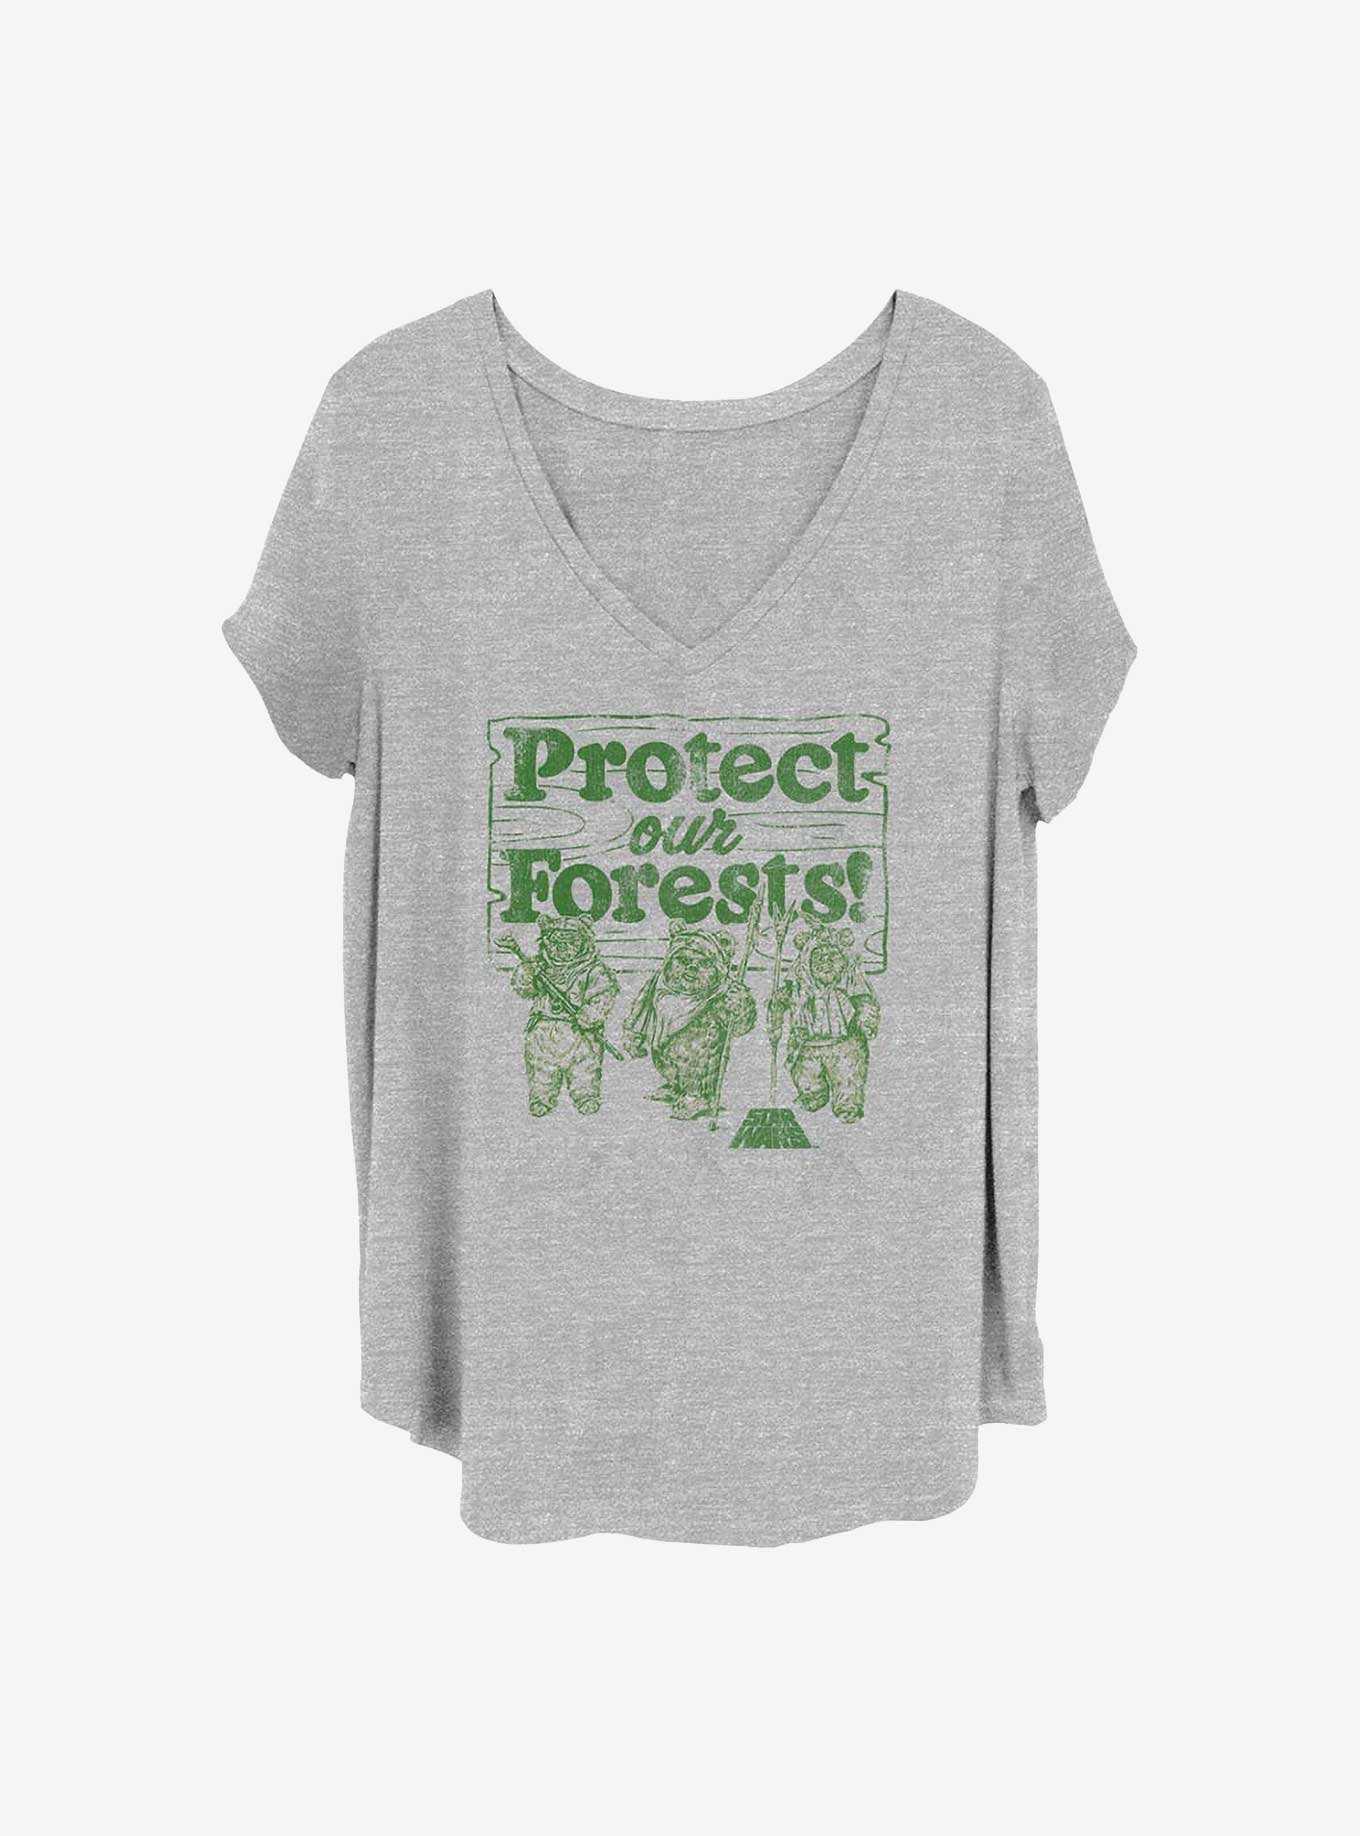 Star Wars Protect Our Forests Girls T-Shirt Plus Size, , hi-res